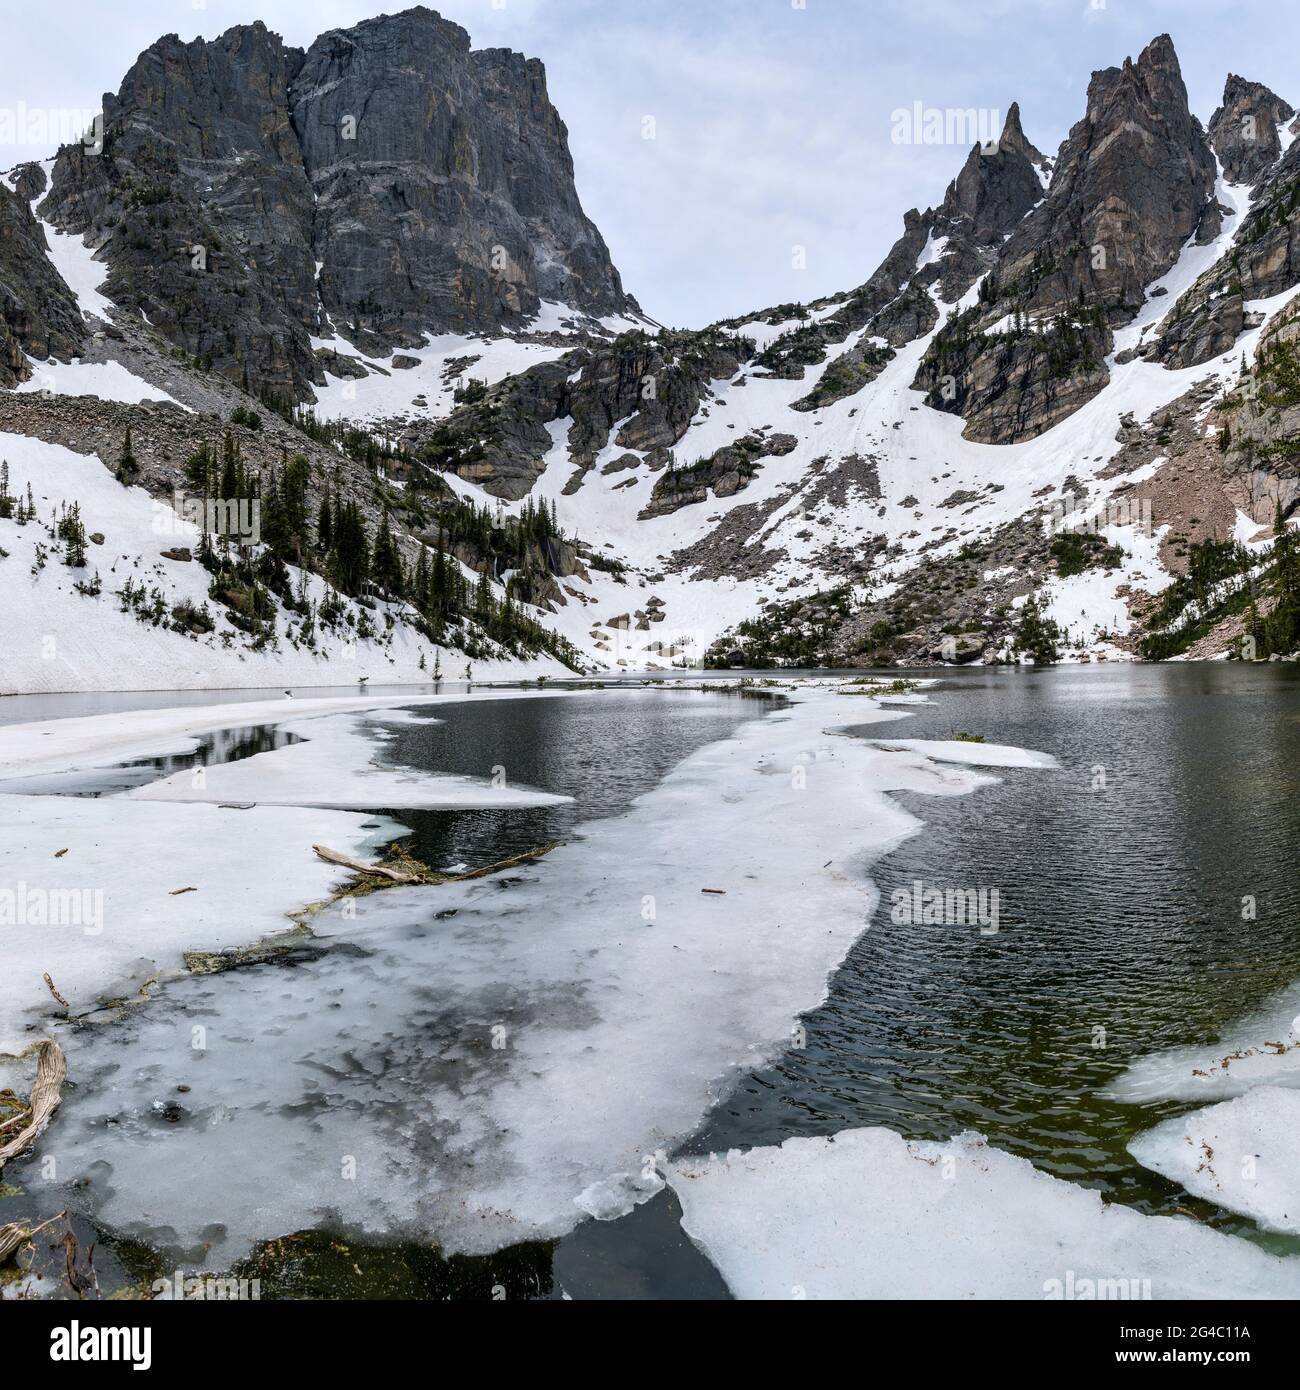 Emerald Lake - A wide-angle Spring view of half-frozen Emerald Lake at base of formidable Hallett Peak and rugged spires of Flattop Mountain. RMNP. Stock Photo